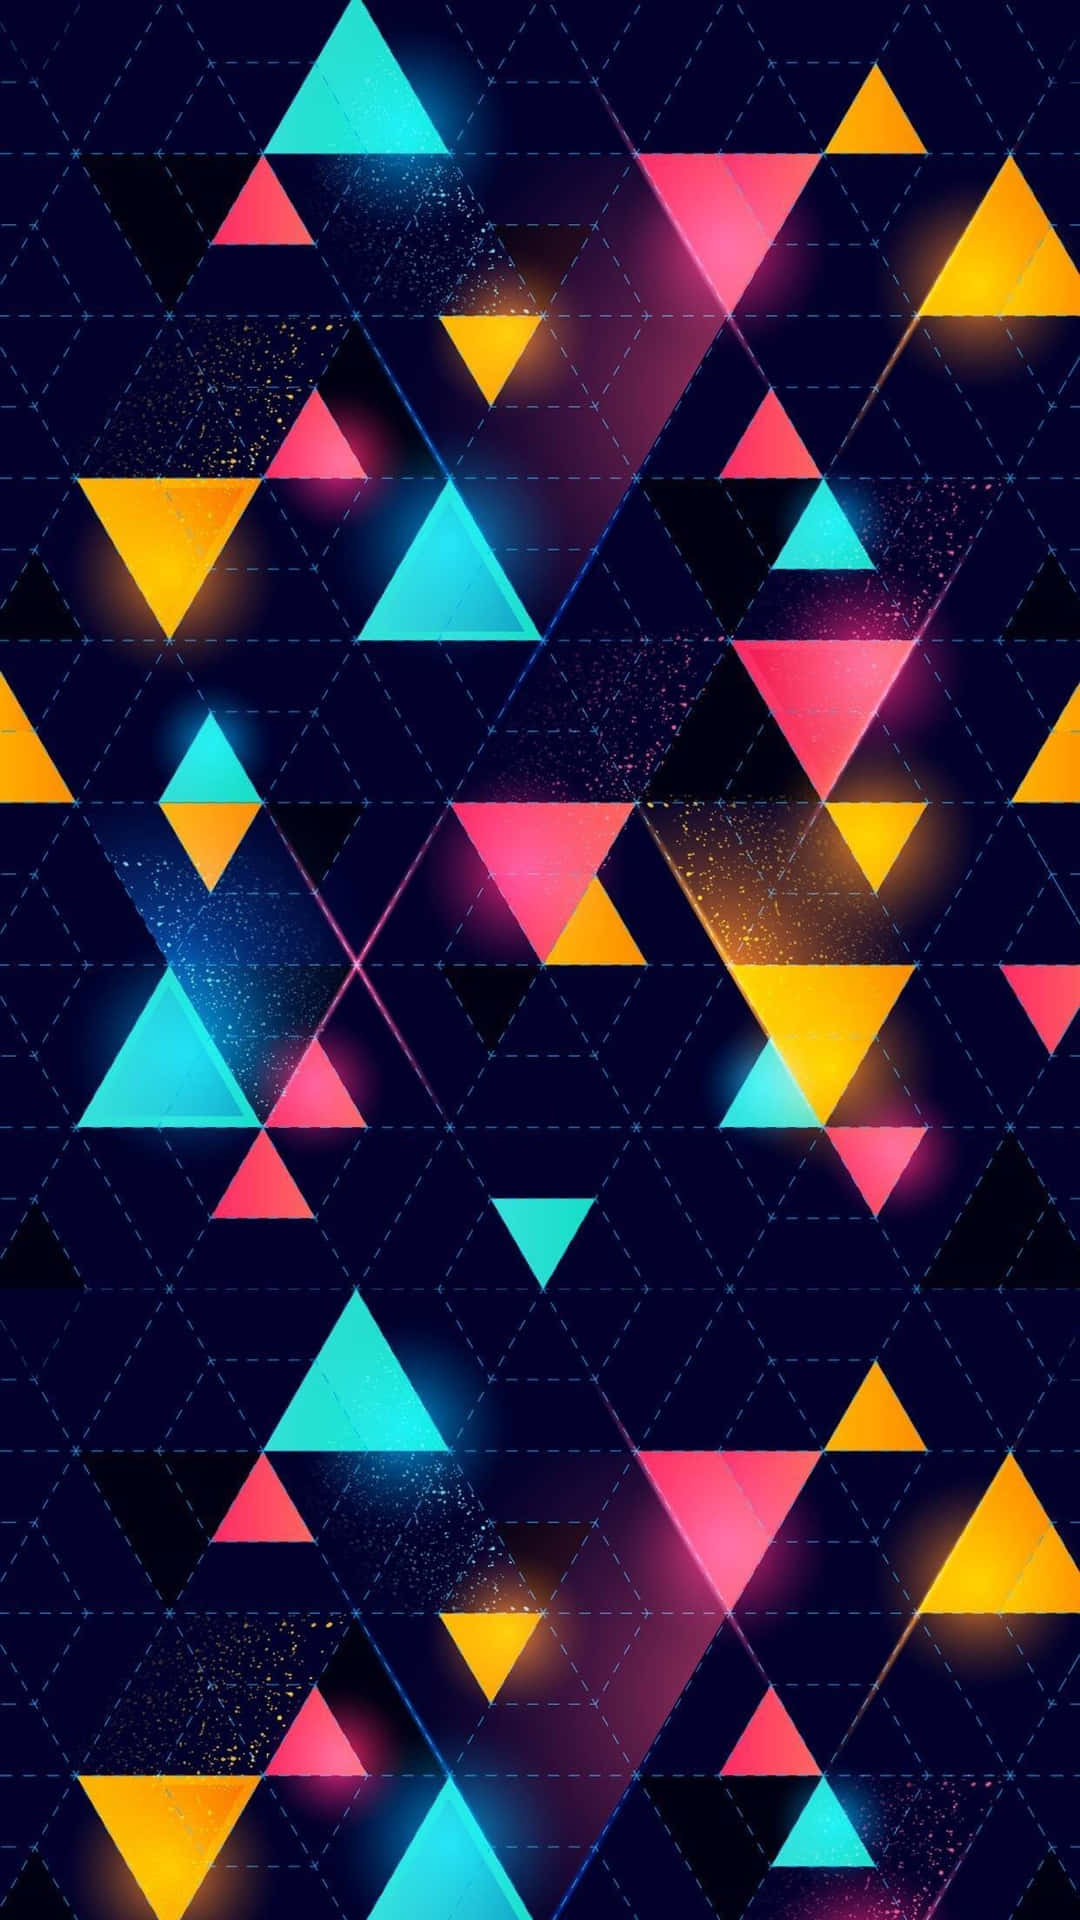 A Colorful Geometric Pattern With Triangles Wallpaper